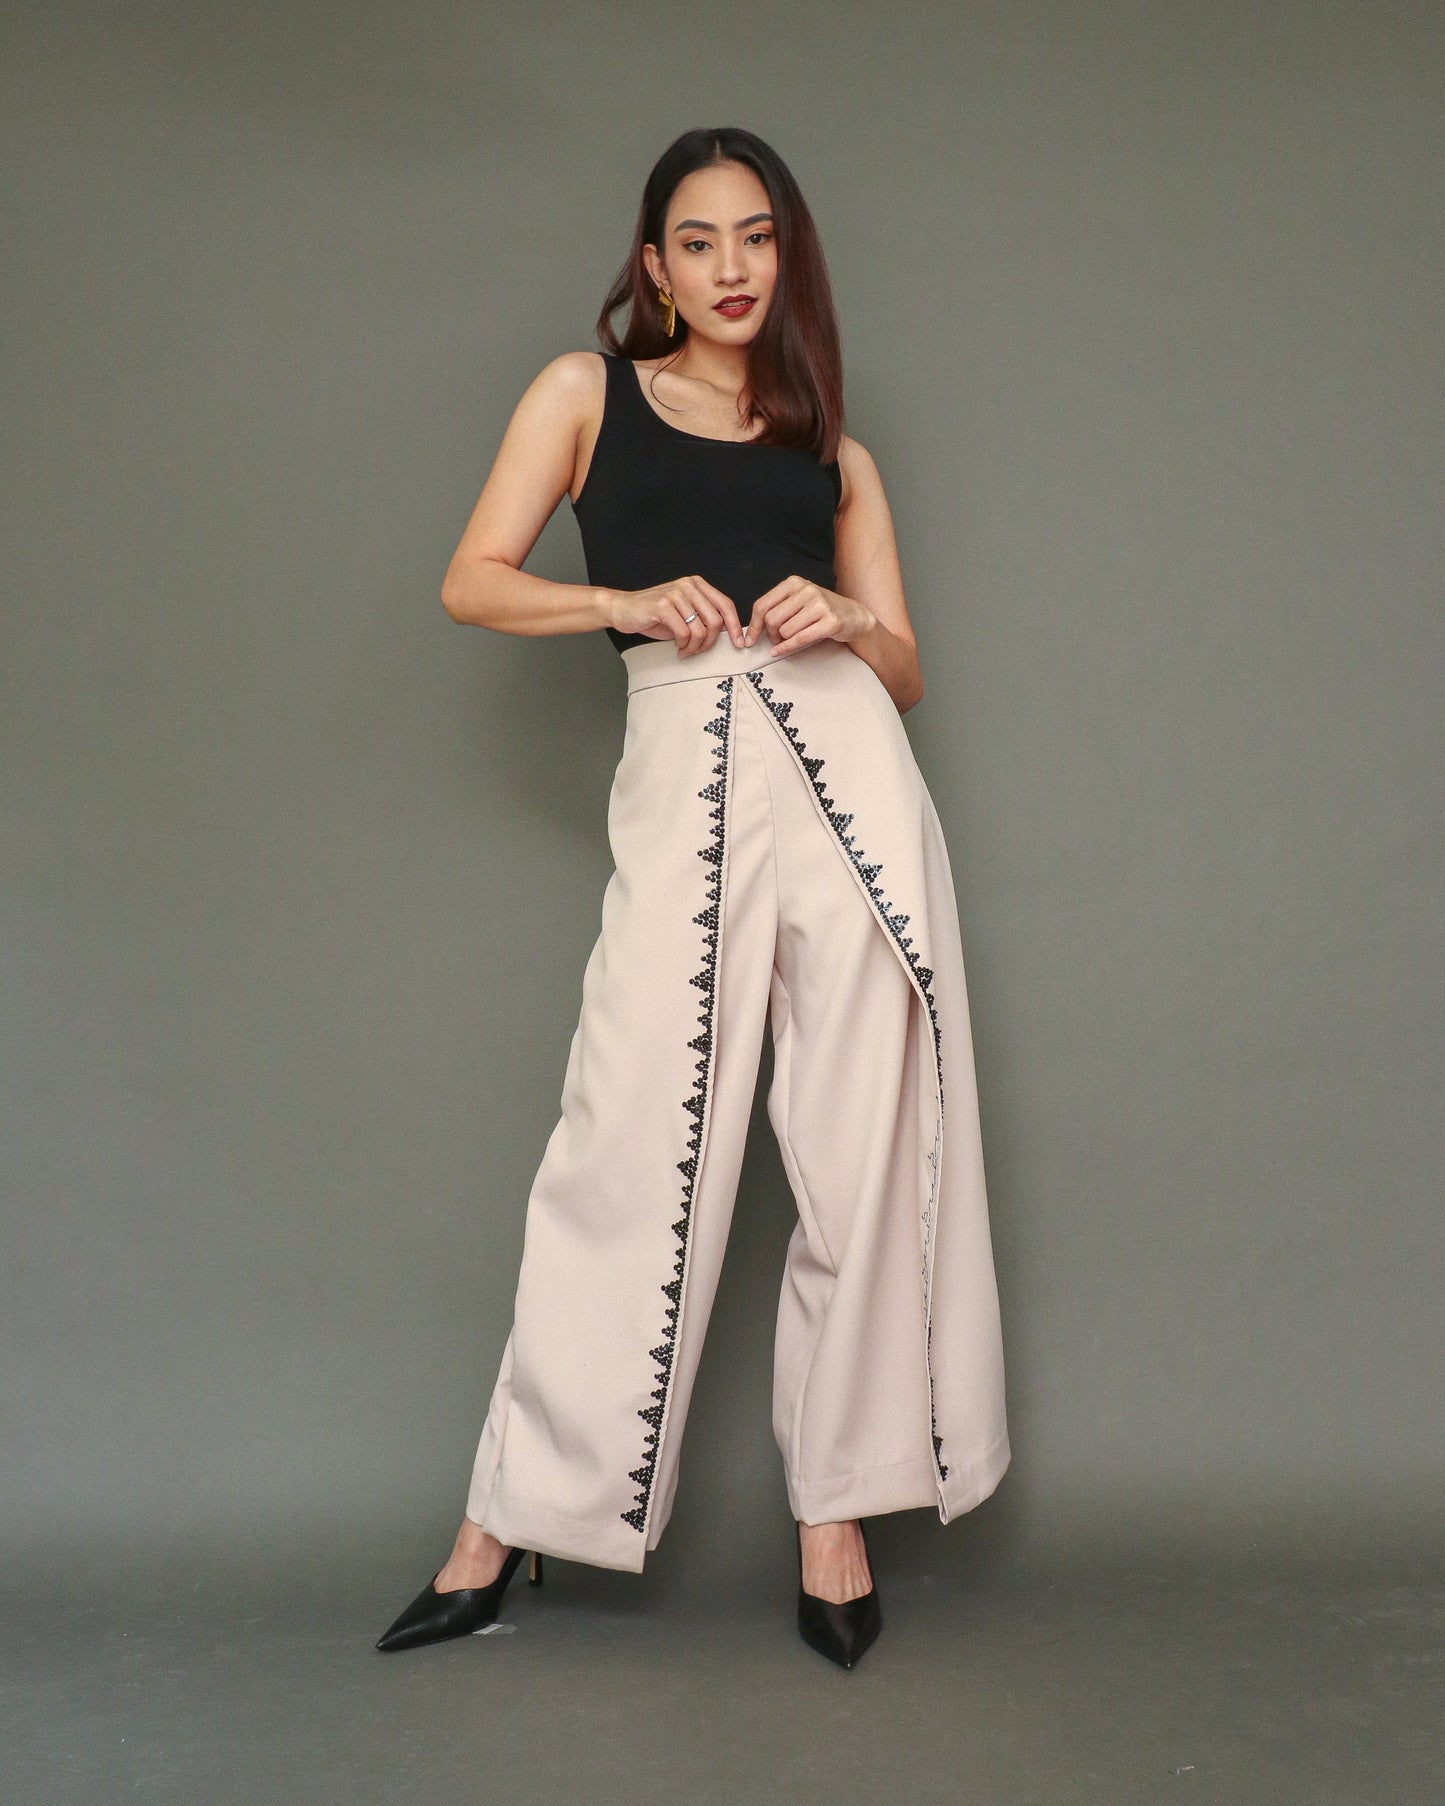 Maayos Kausap Non-Crumple Flair Pants with Black Embroidery in Cream